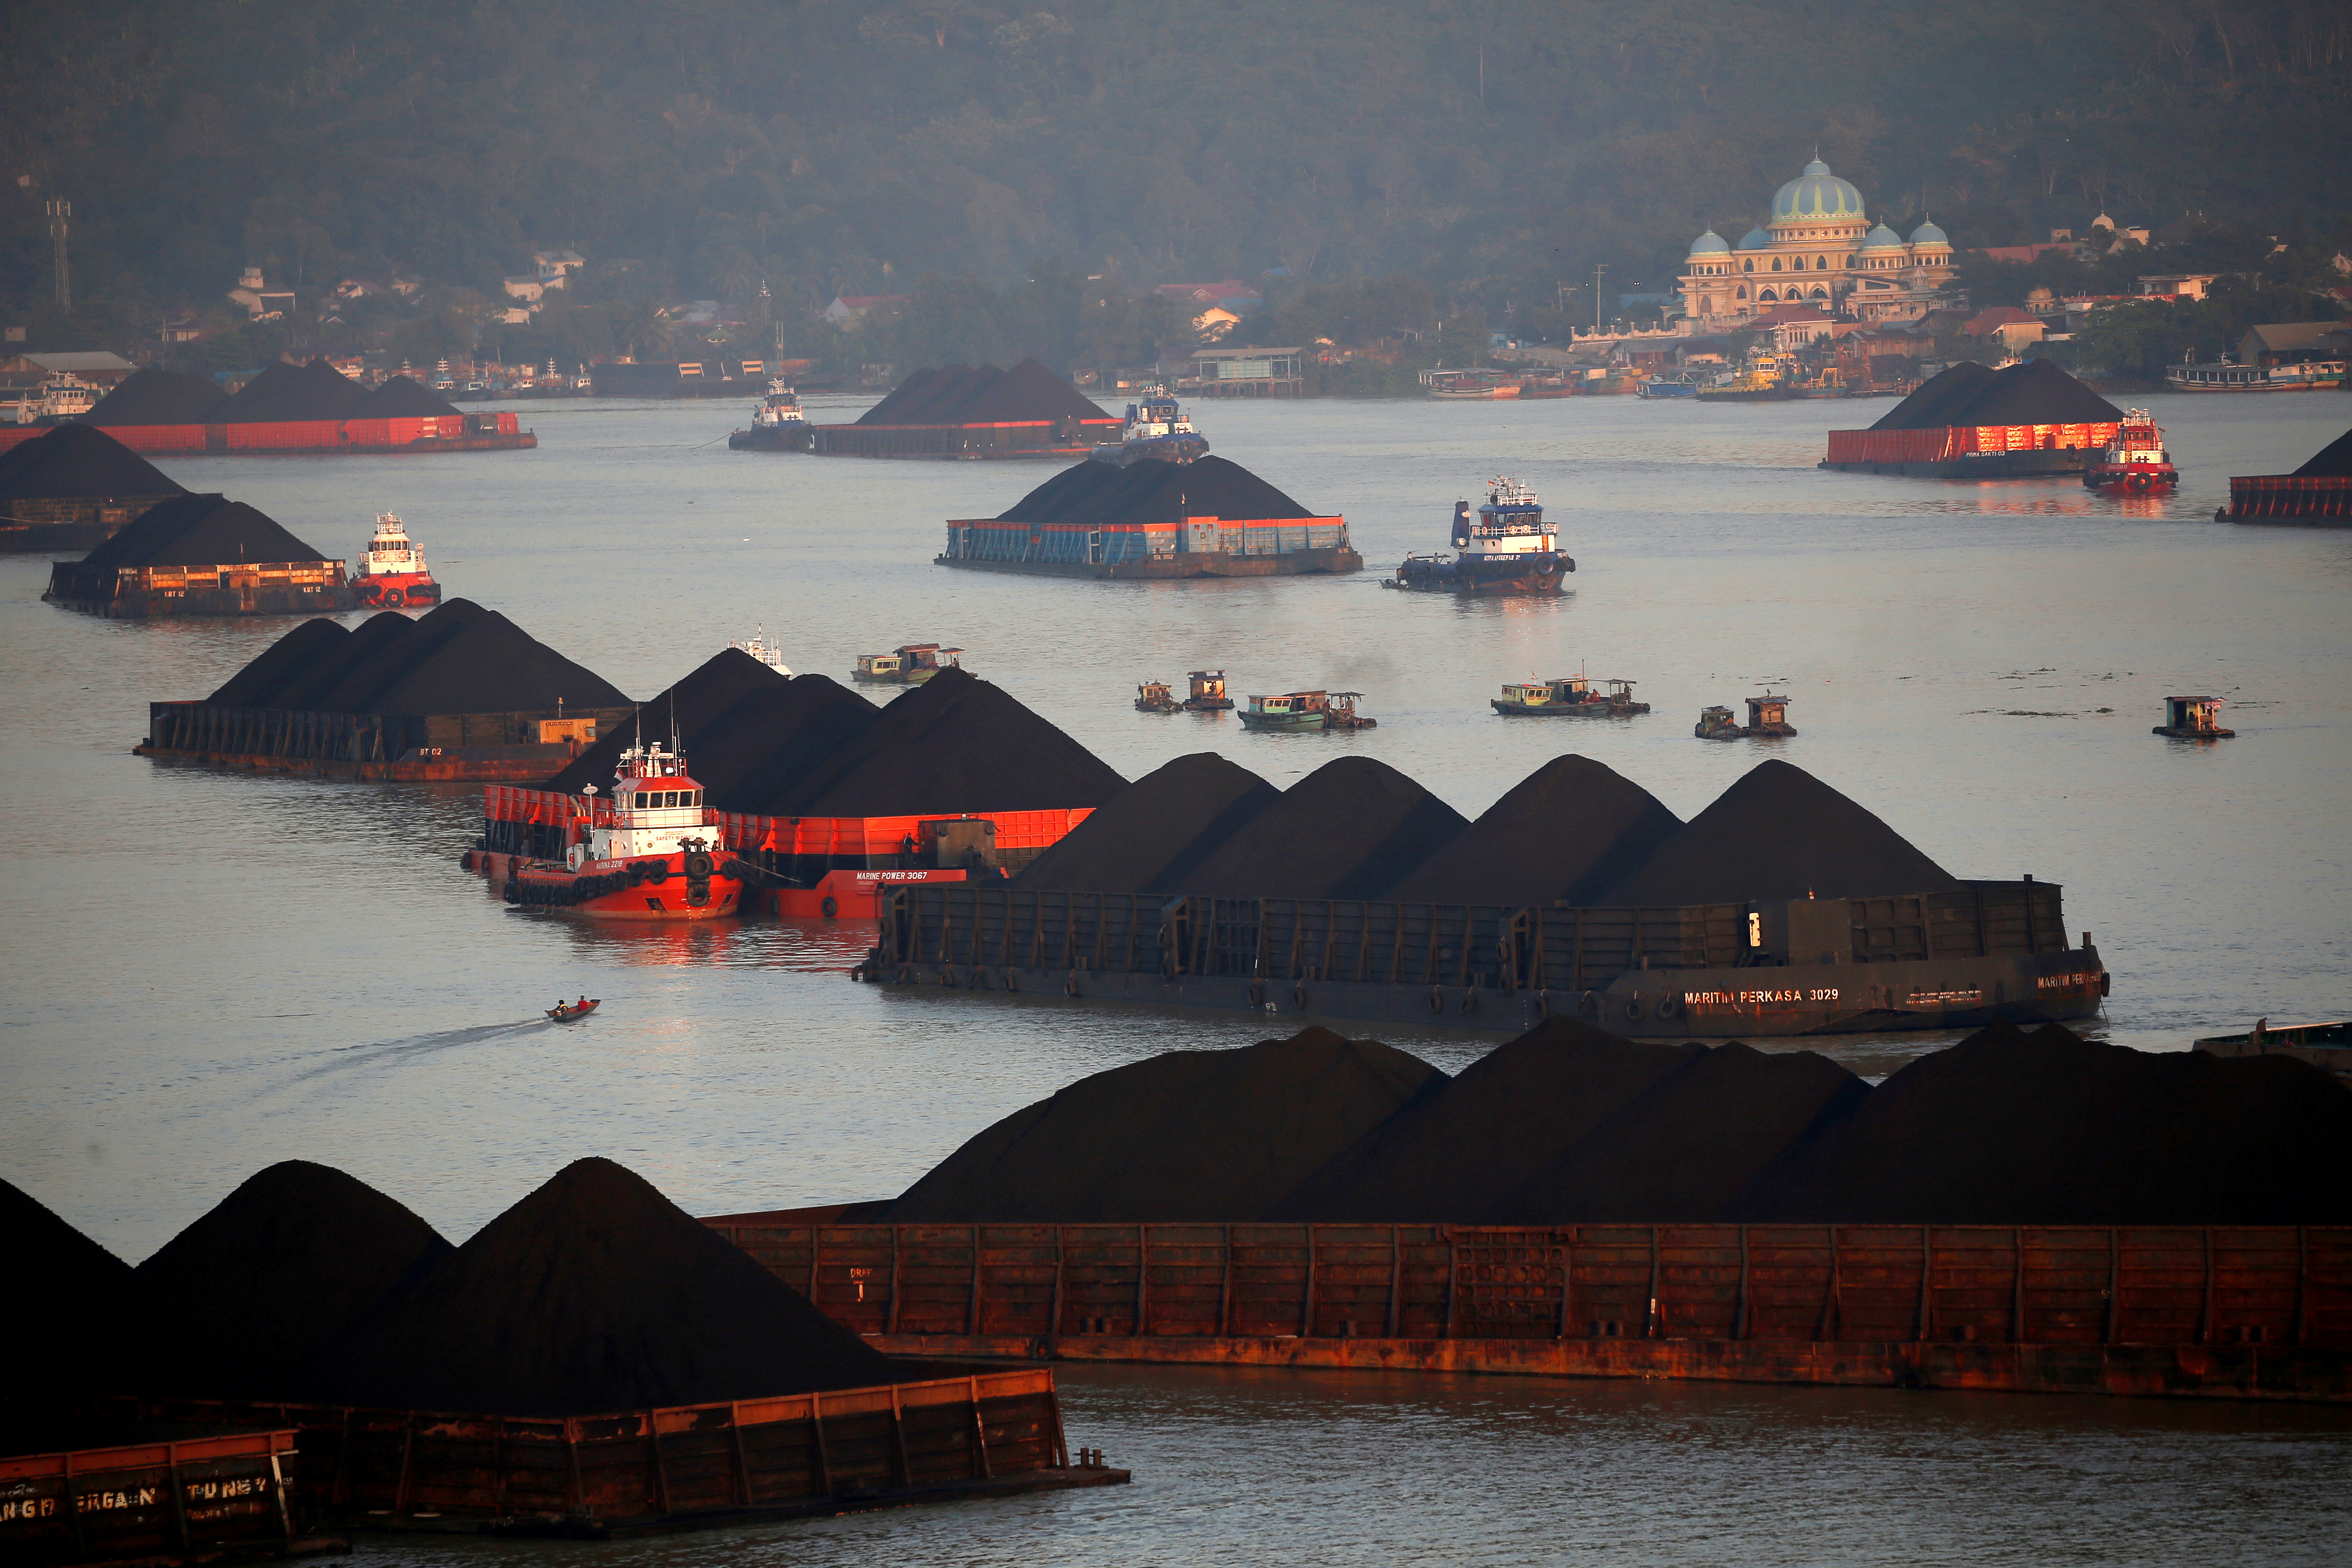 Coal barges are pictured as they queue to be pull along Mahakam river in Samarinda, East Kalimantan province, Indonesia, August 31, 2019. REUTERS/Willy Kurniawan